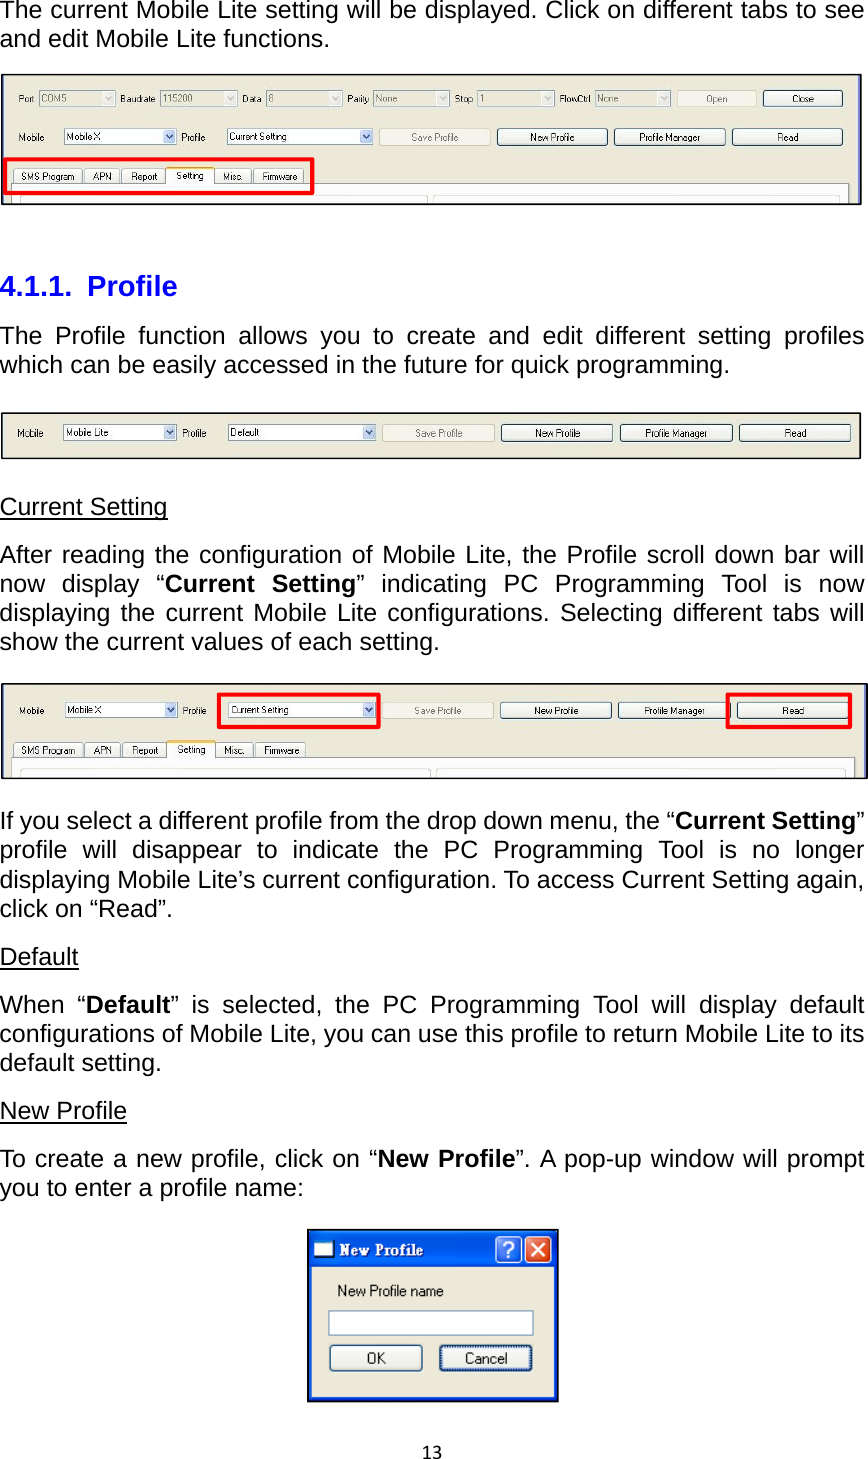 13The current Mobile Lite setting will be displayed. Click on different tabs to see and edit Mobile Lite functions.   4.1.1. Profile The Profile function allows you to create and edit different setting profiles which can be easily accessed in the future for quick programming.  Current Setting After reading the configuration of Mobile Lite, the Profile scroll down bar will now display “Current Setting” indicating PC Programming Tool is now displaying the current Mobile Lite configurations. Selecting different tabs will show the current values of each setting.  If you select a different profile from the drop down menu, the “Current Setting” profile will disappear to indicate the PC Programming Tool is no longer displaying Mobile Lite’s current configuration. To access Current Setting again, click on “Read”. Default When “Default” is selected, the PC Programming Tool will display default configurations of Mobile Lite, you can use this profile to return Mobile Lite to its default setting. New Profile To create a new profile, click on “New Profile”. A pop-up window will prompt you to enter a profile name:  